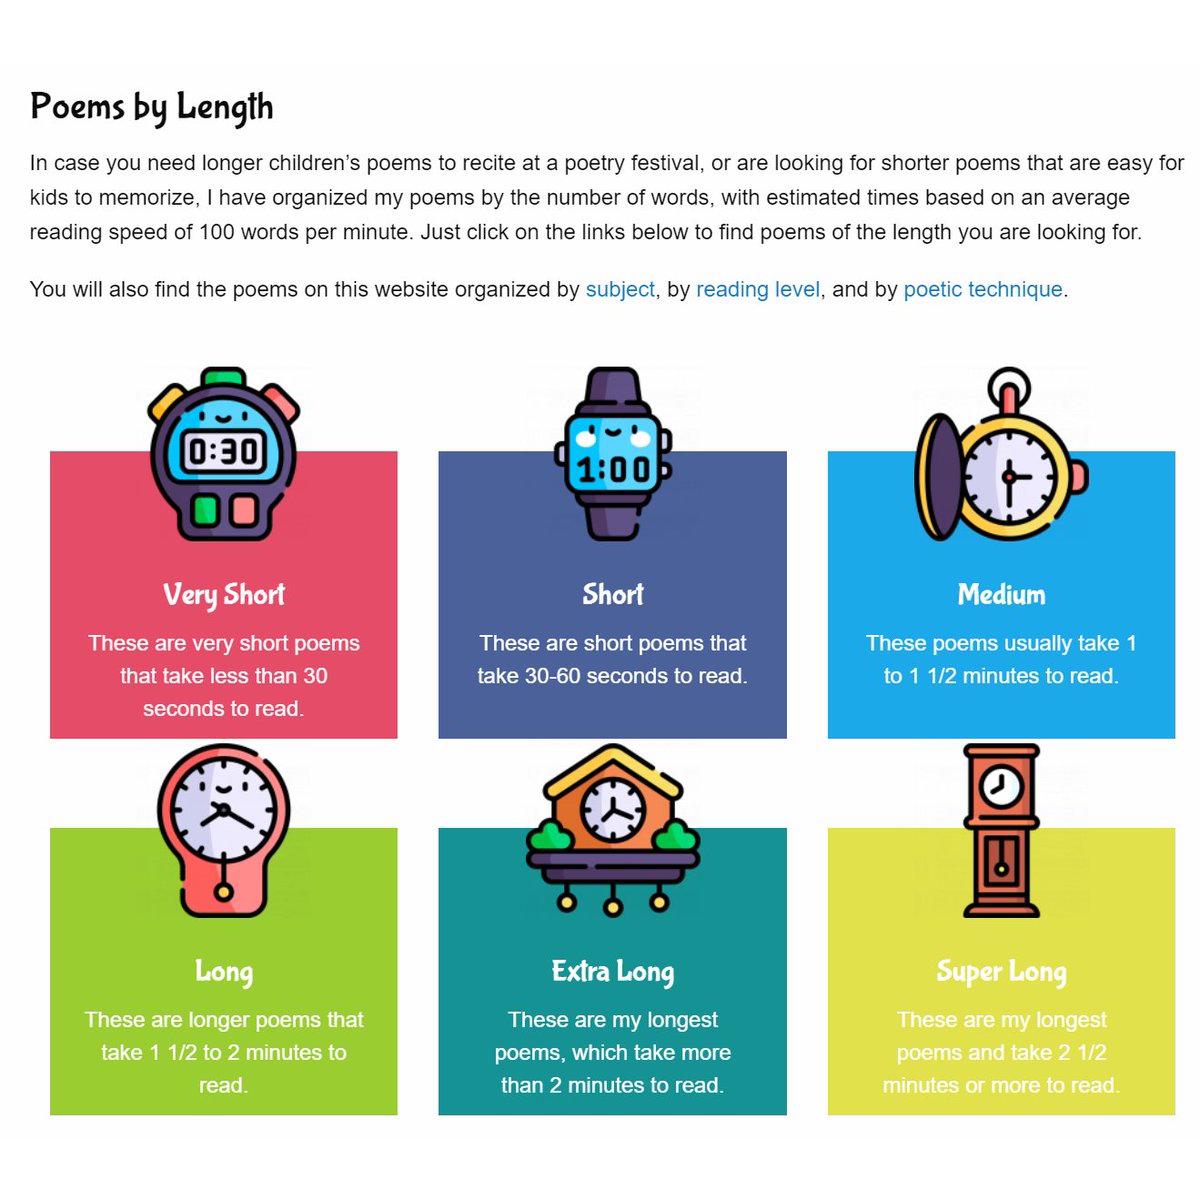 As the Chief Poet and Programmer at Poetry4kids, I have finally updated the Poems by Length page to let members find poems based on how long they take to recite. More details here: poetry4kids.com/news/update-to… #nationalpoetrymonth #poetry4kids #childrenspoetry